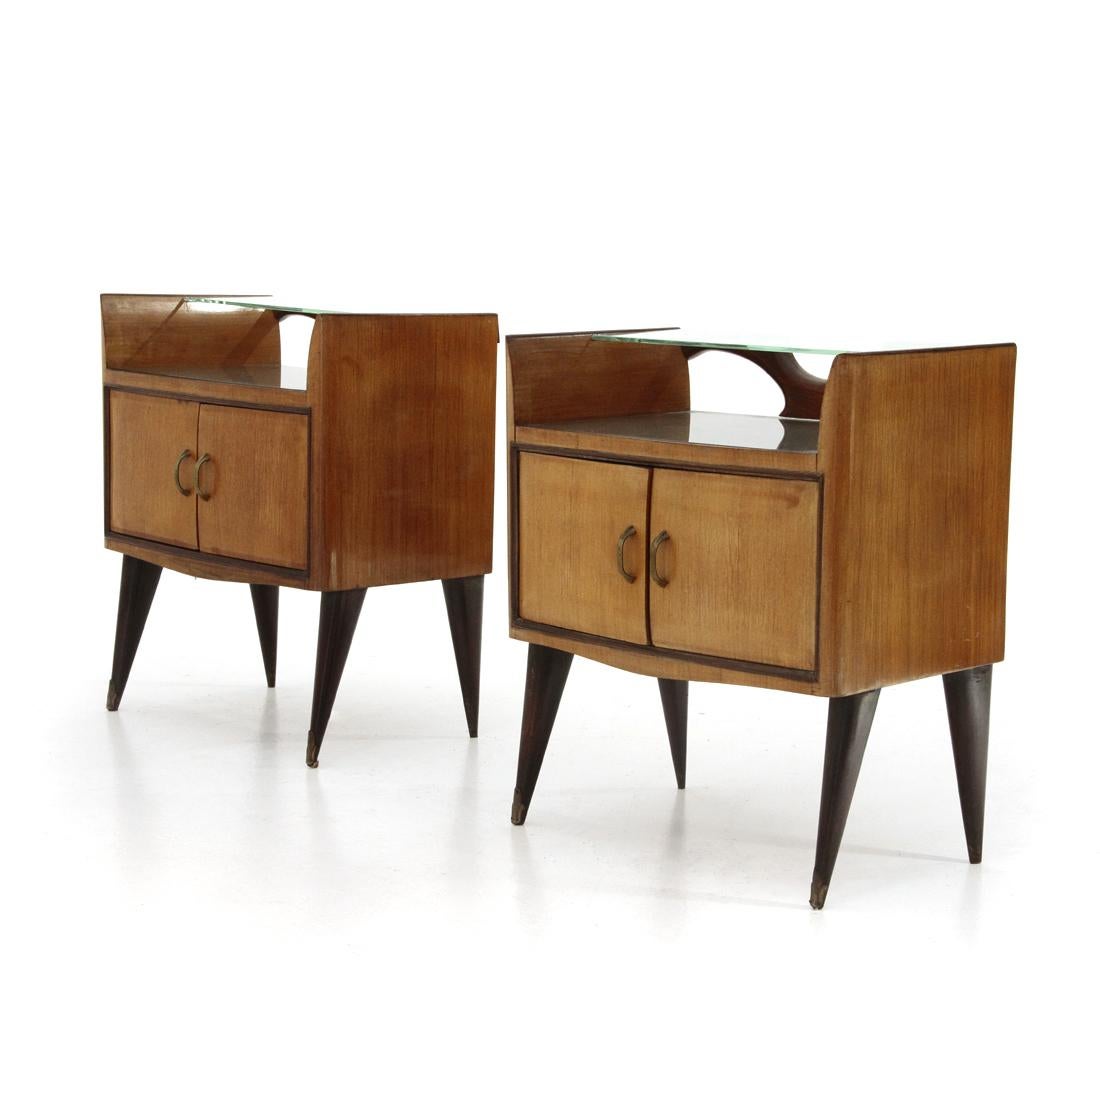 Italian Pair of Bedside Tables with Glass Shelf, 1950s